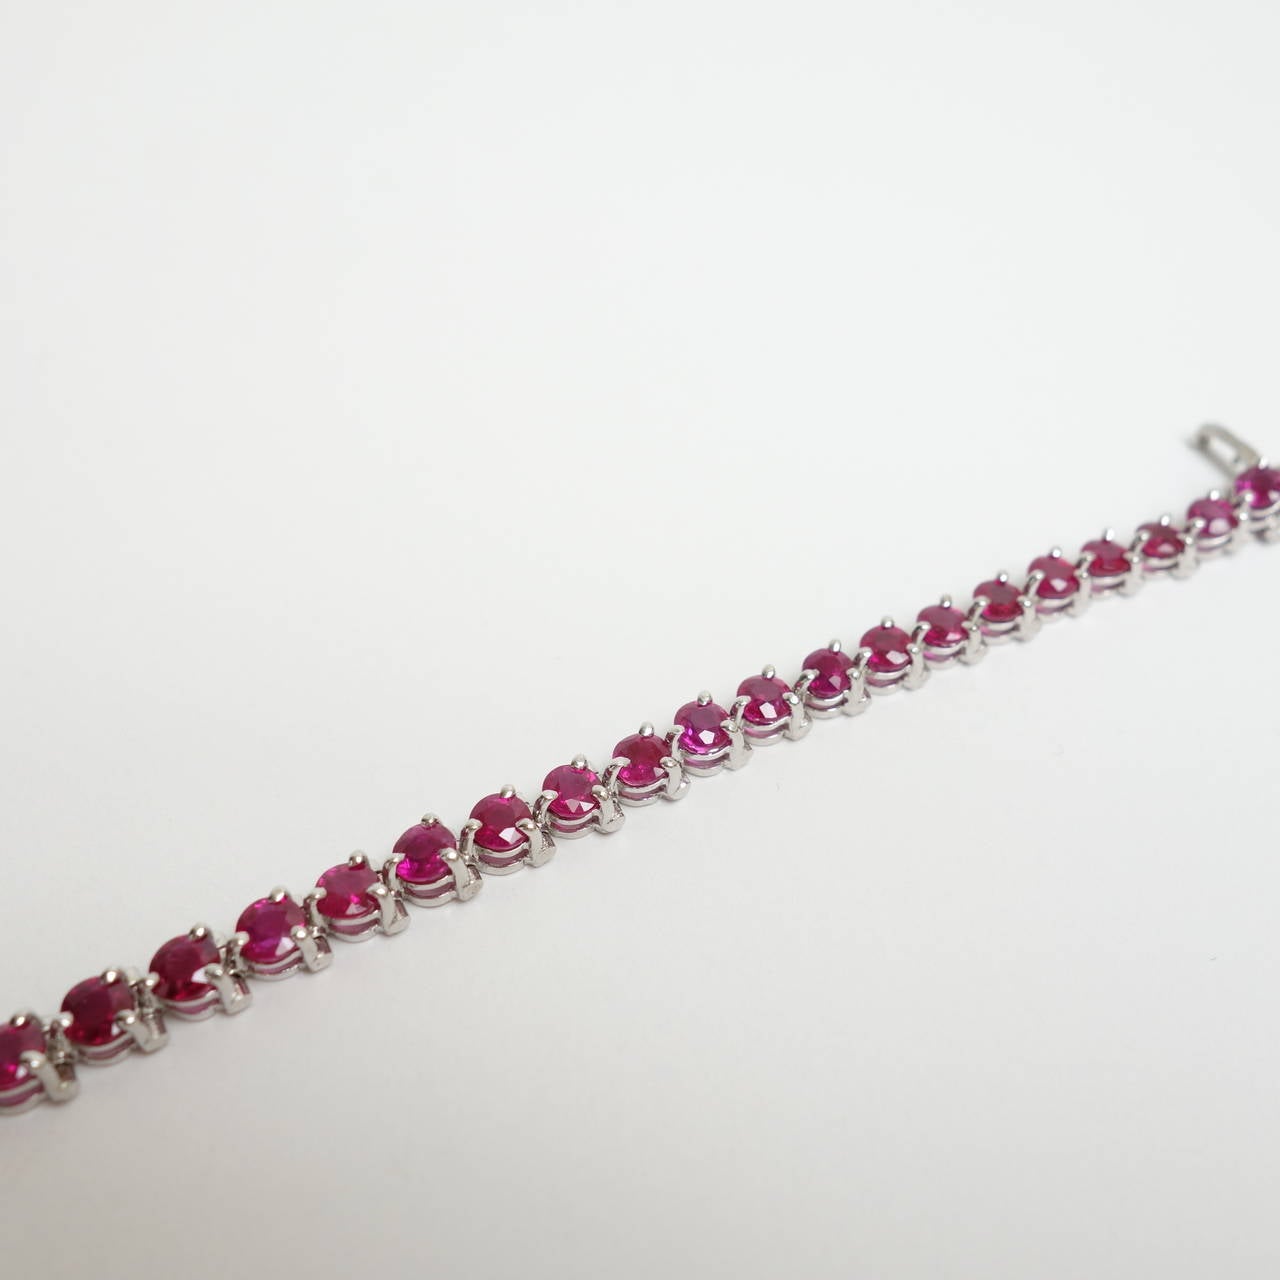 Composed of a series of perfectly matched 3-prong set in-line round cut natural rubies. Vibrant, strong, saturated color, transparency and high clarity makes this simple but classic bracelet unique and desirable.  Seven inch length terminating in a